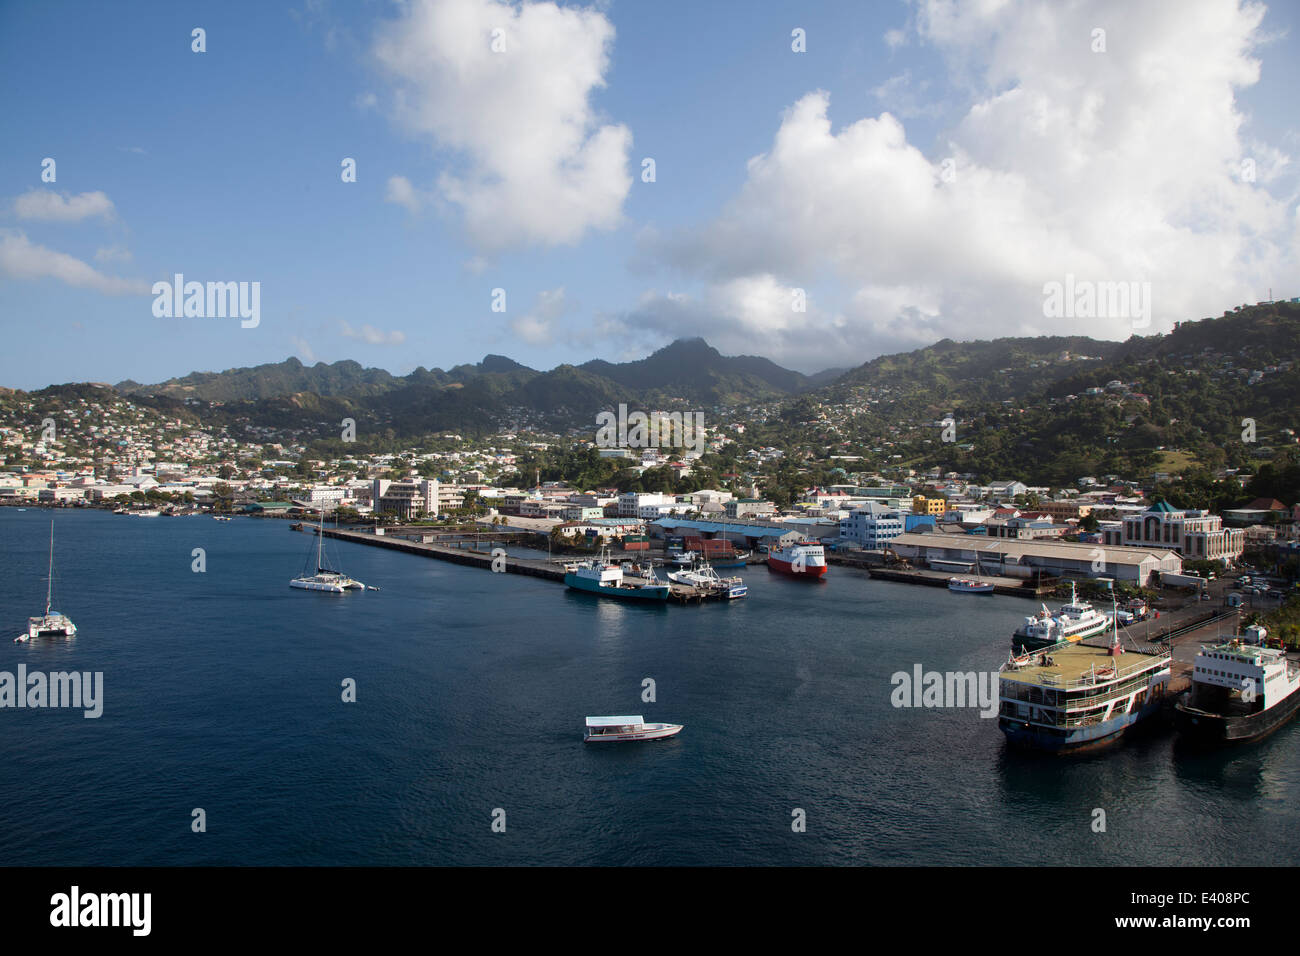 Kingstown Capital of Saint Vincent and the Grenadines Stock Photo